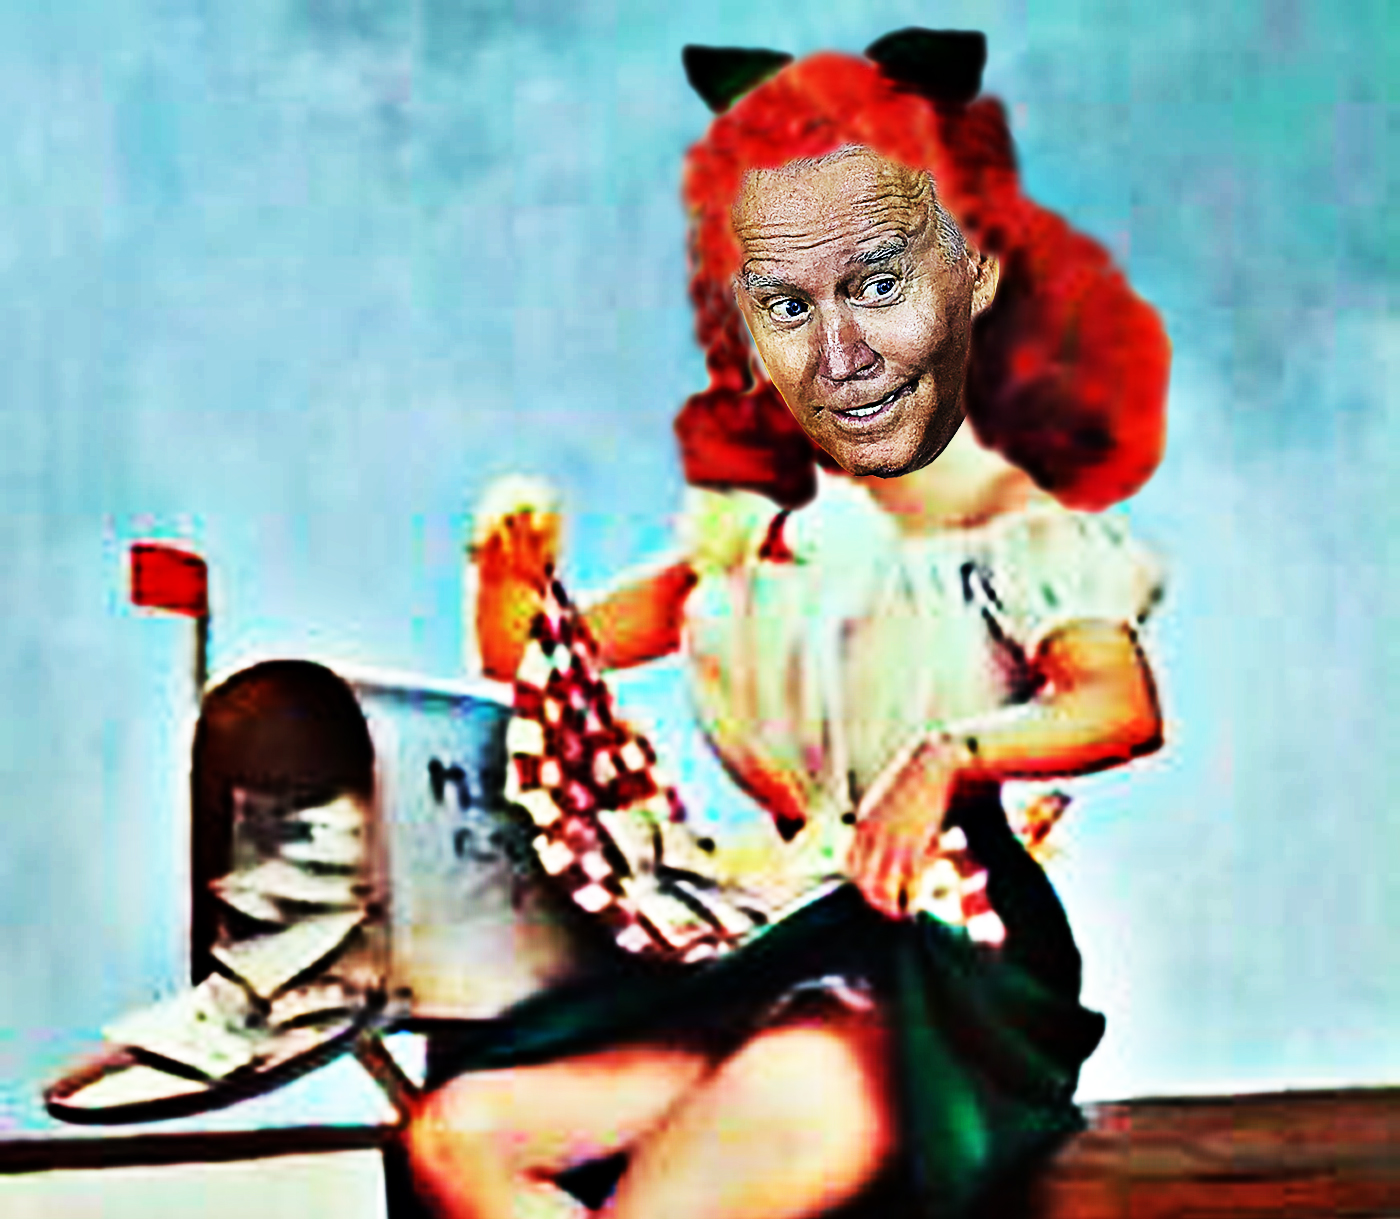 “State of the Union” - Joe Biden CowGirl “I Got Hairy Legs” Really “Mailed It In”